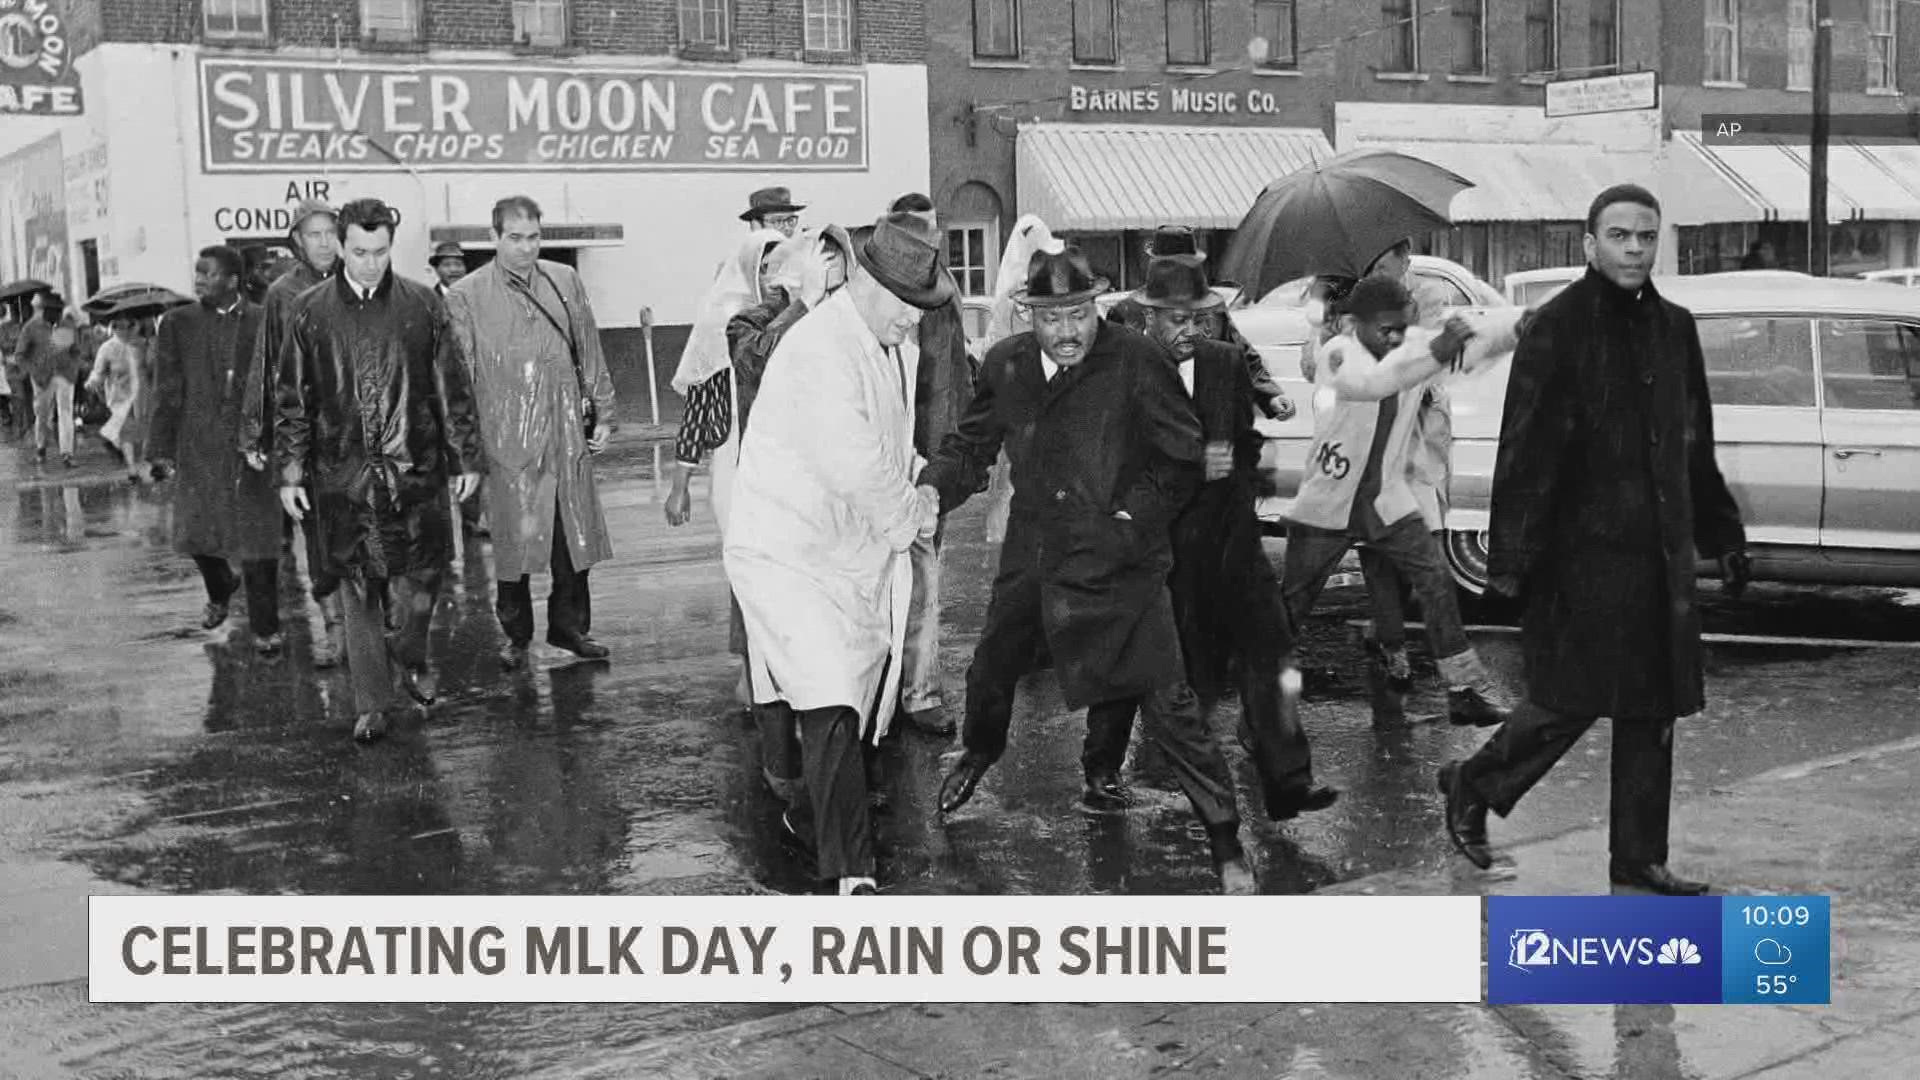 On Monday a march to honor Dr. King will start at 9 a.m. followed by an all-day festival.